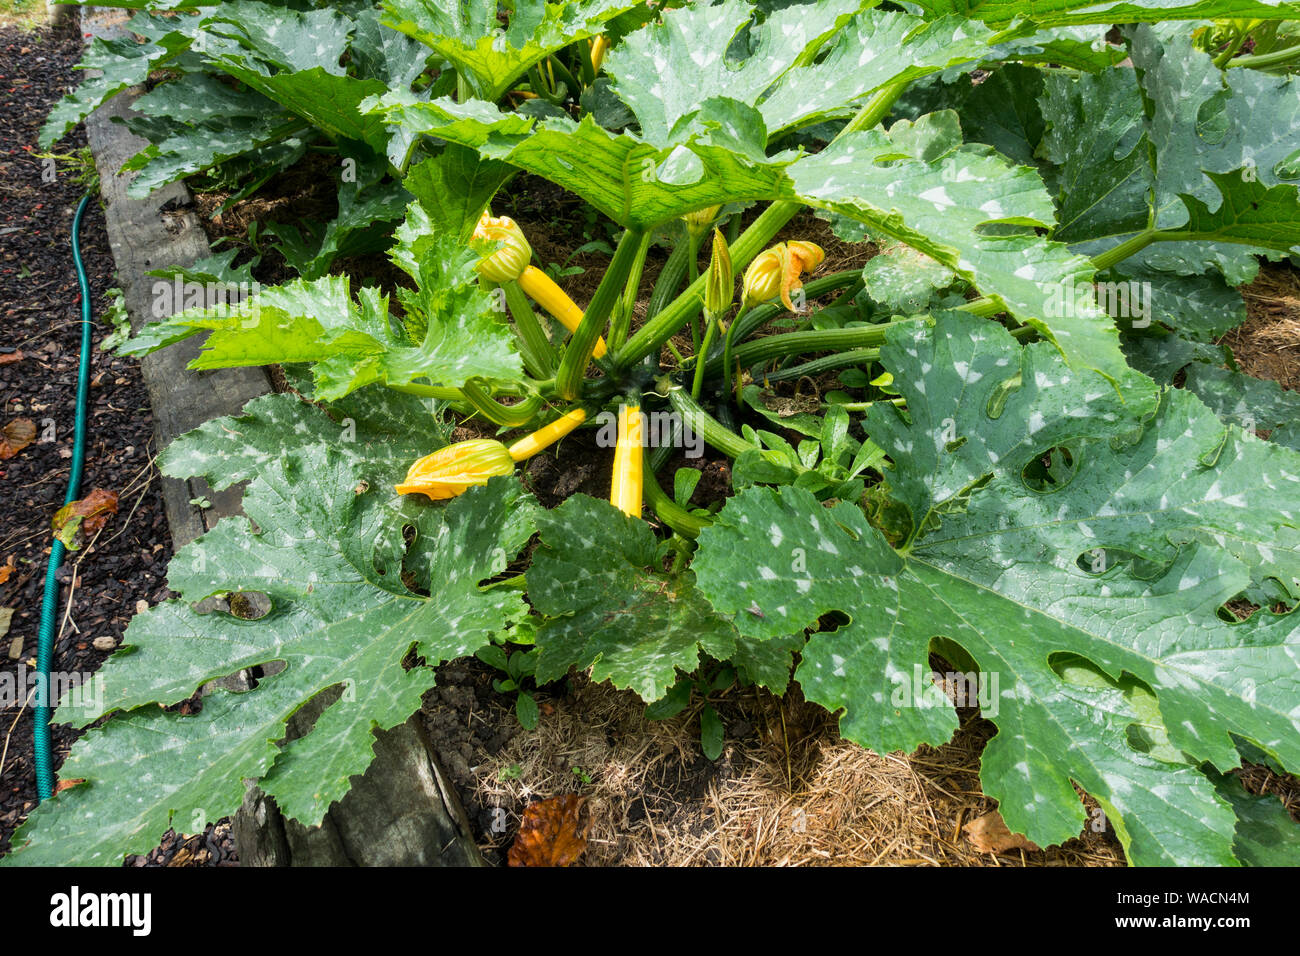 Courgettes growing in a raised vegetable bed, England, UK. Stock Photo